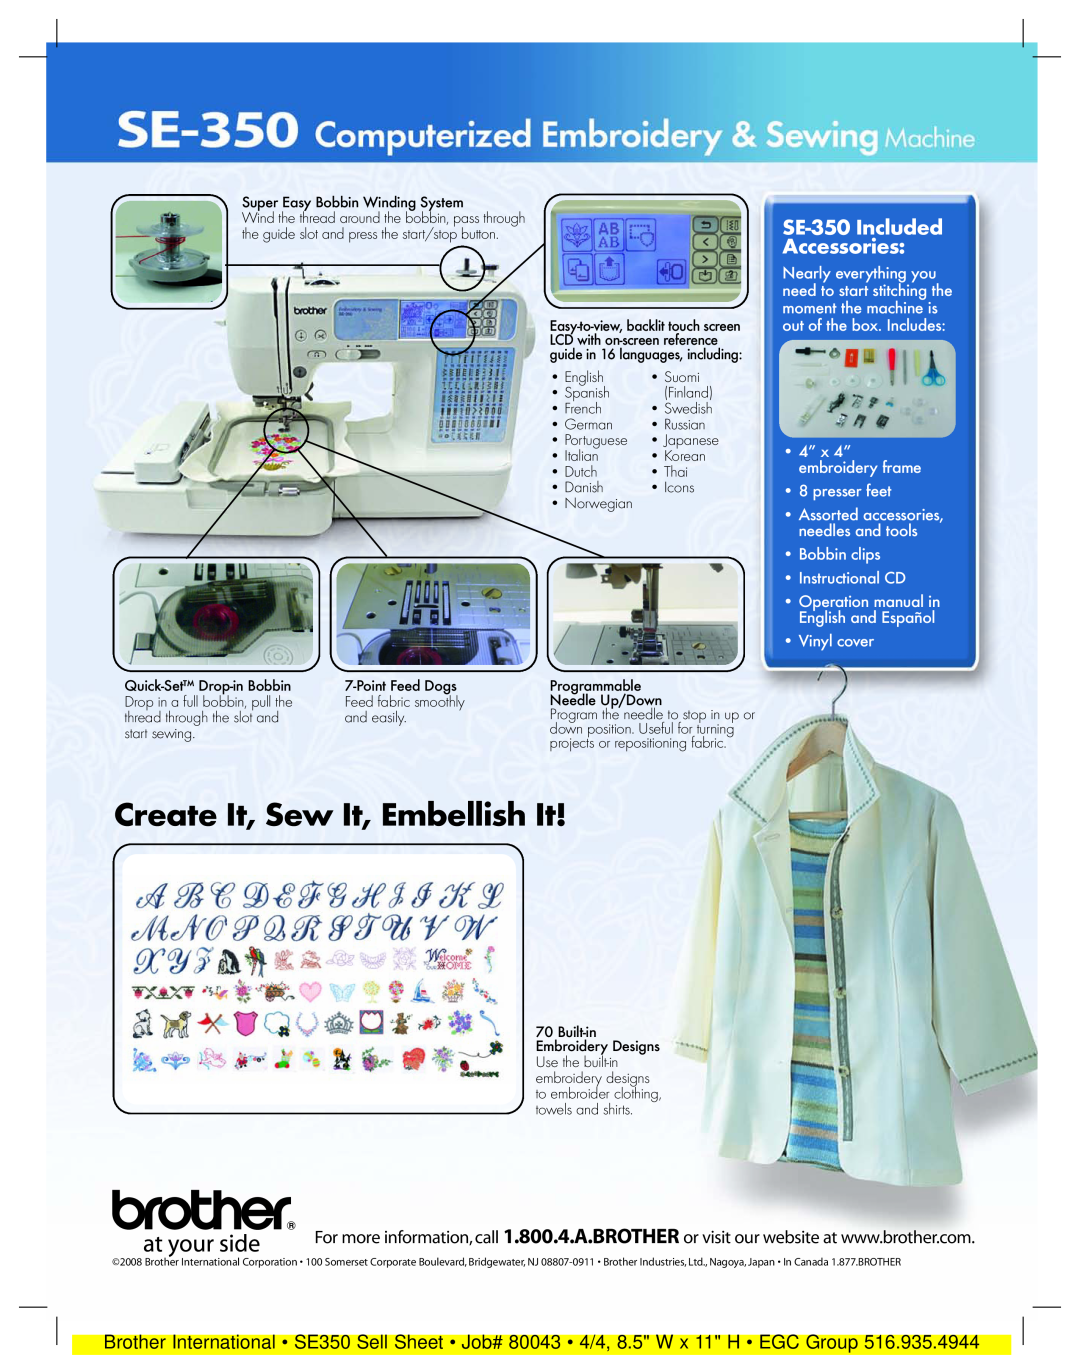 Brother manual Create It, Sew It, Embellish It, SE-350 Included Accessories, presser feet, Bobbin clips Instructional CD 